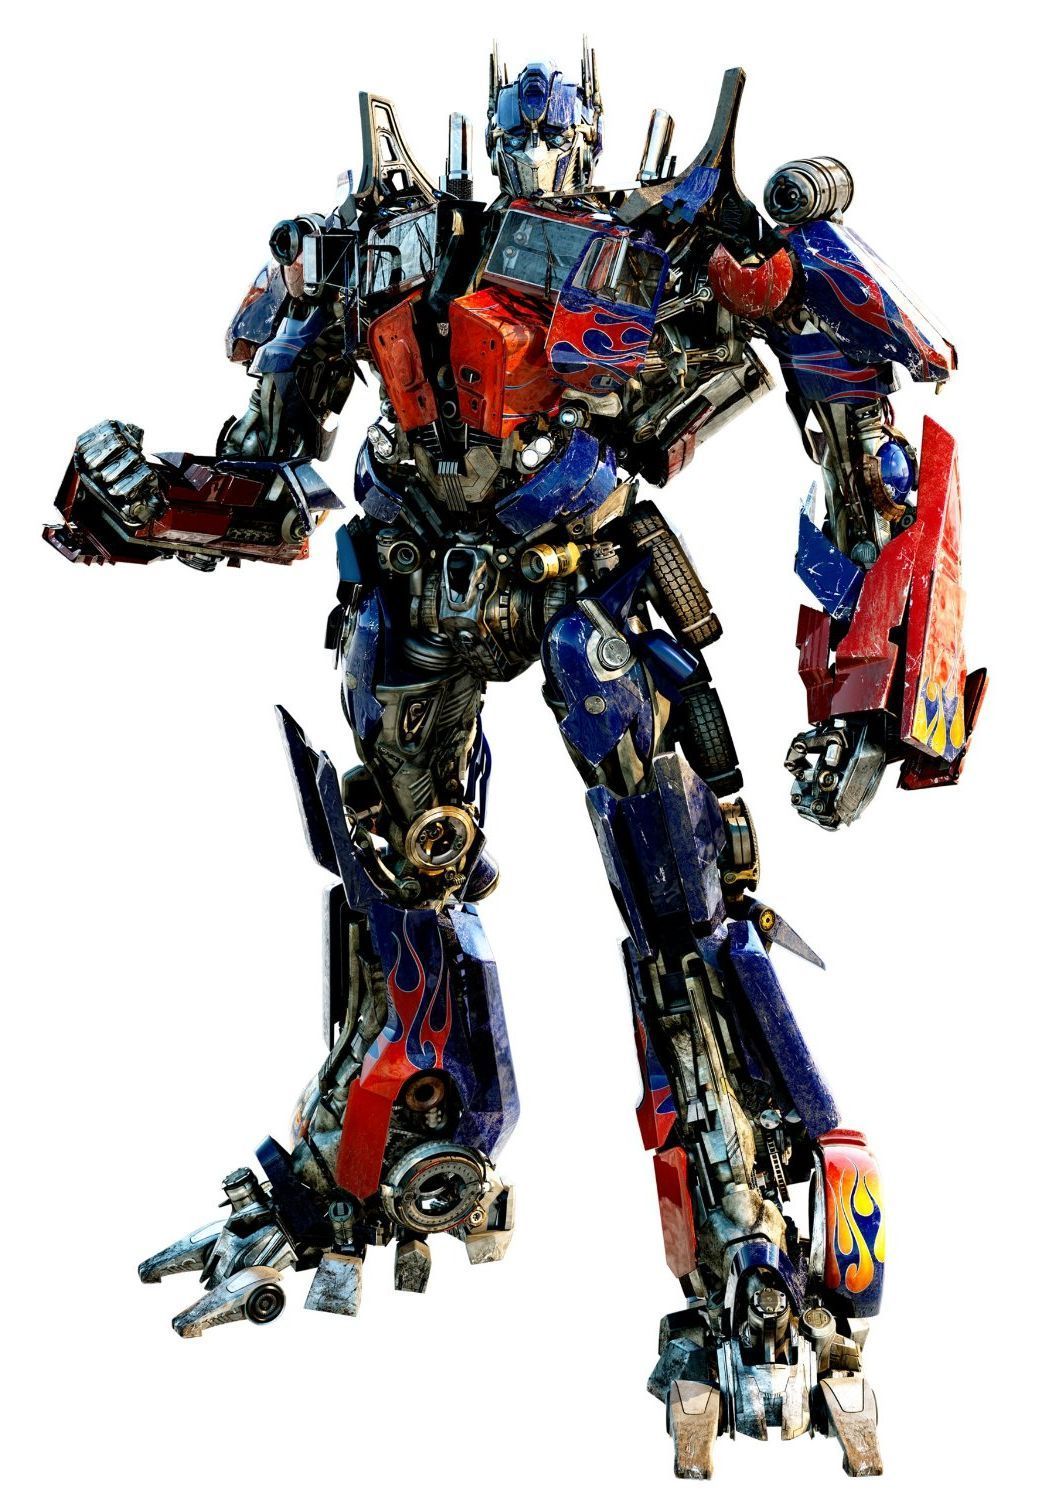 Optimus Prime (Transformers Cinematic Universe). Heroes of the characters